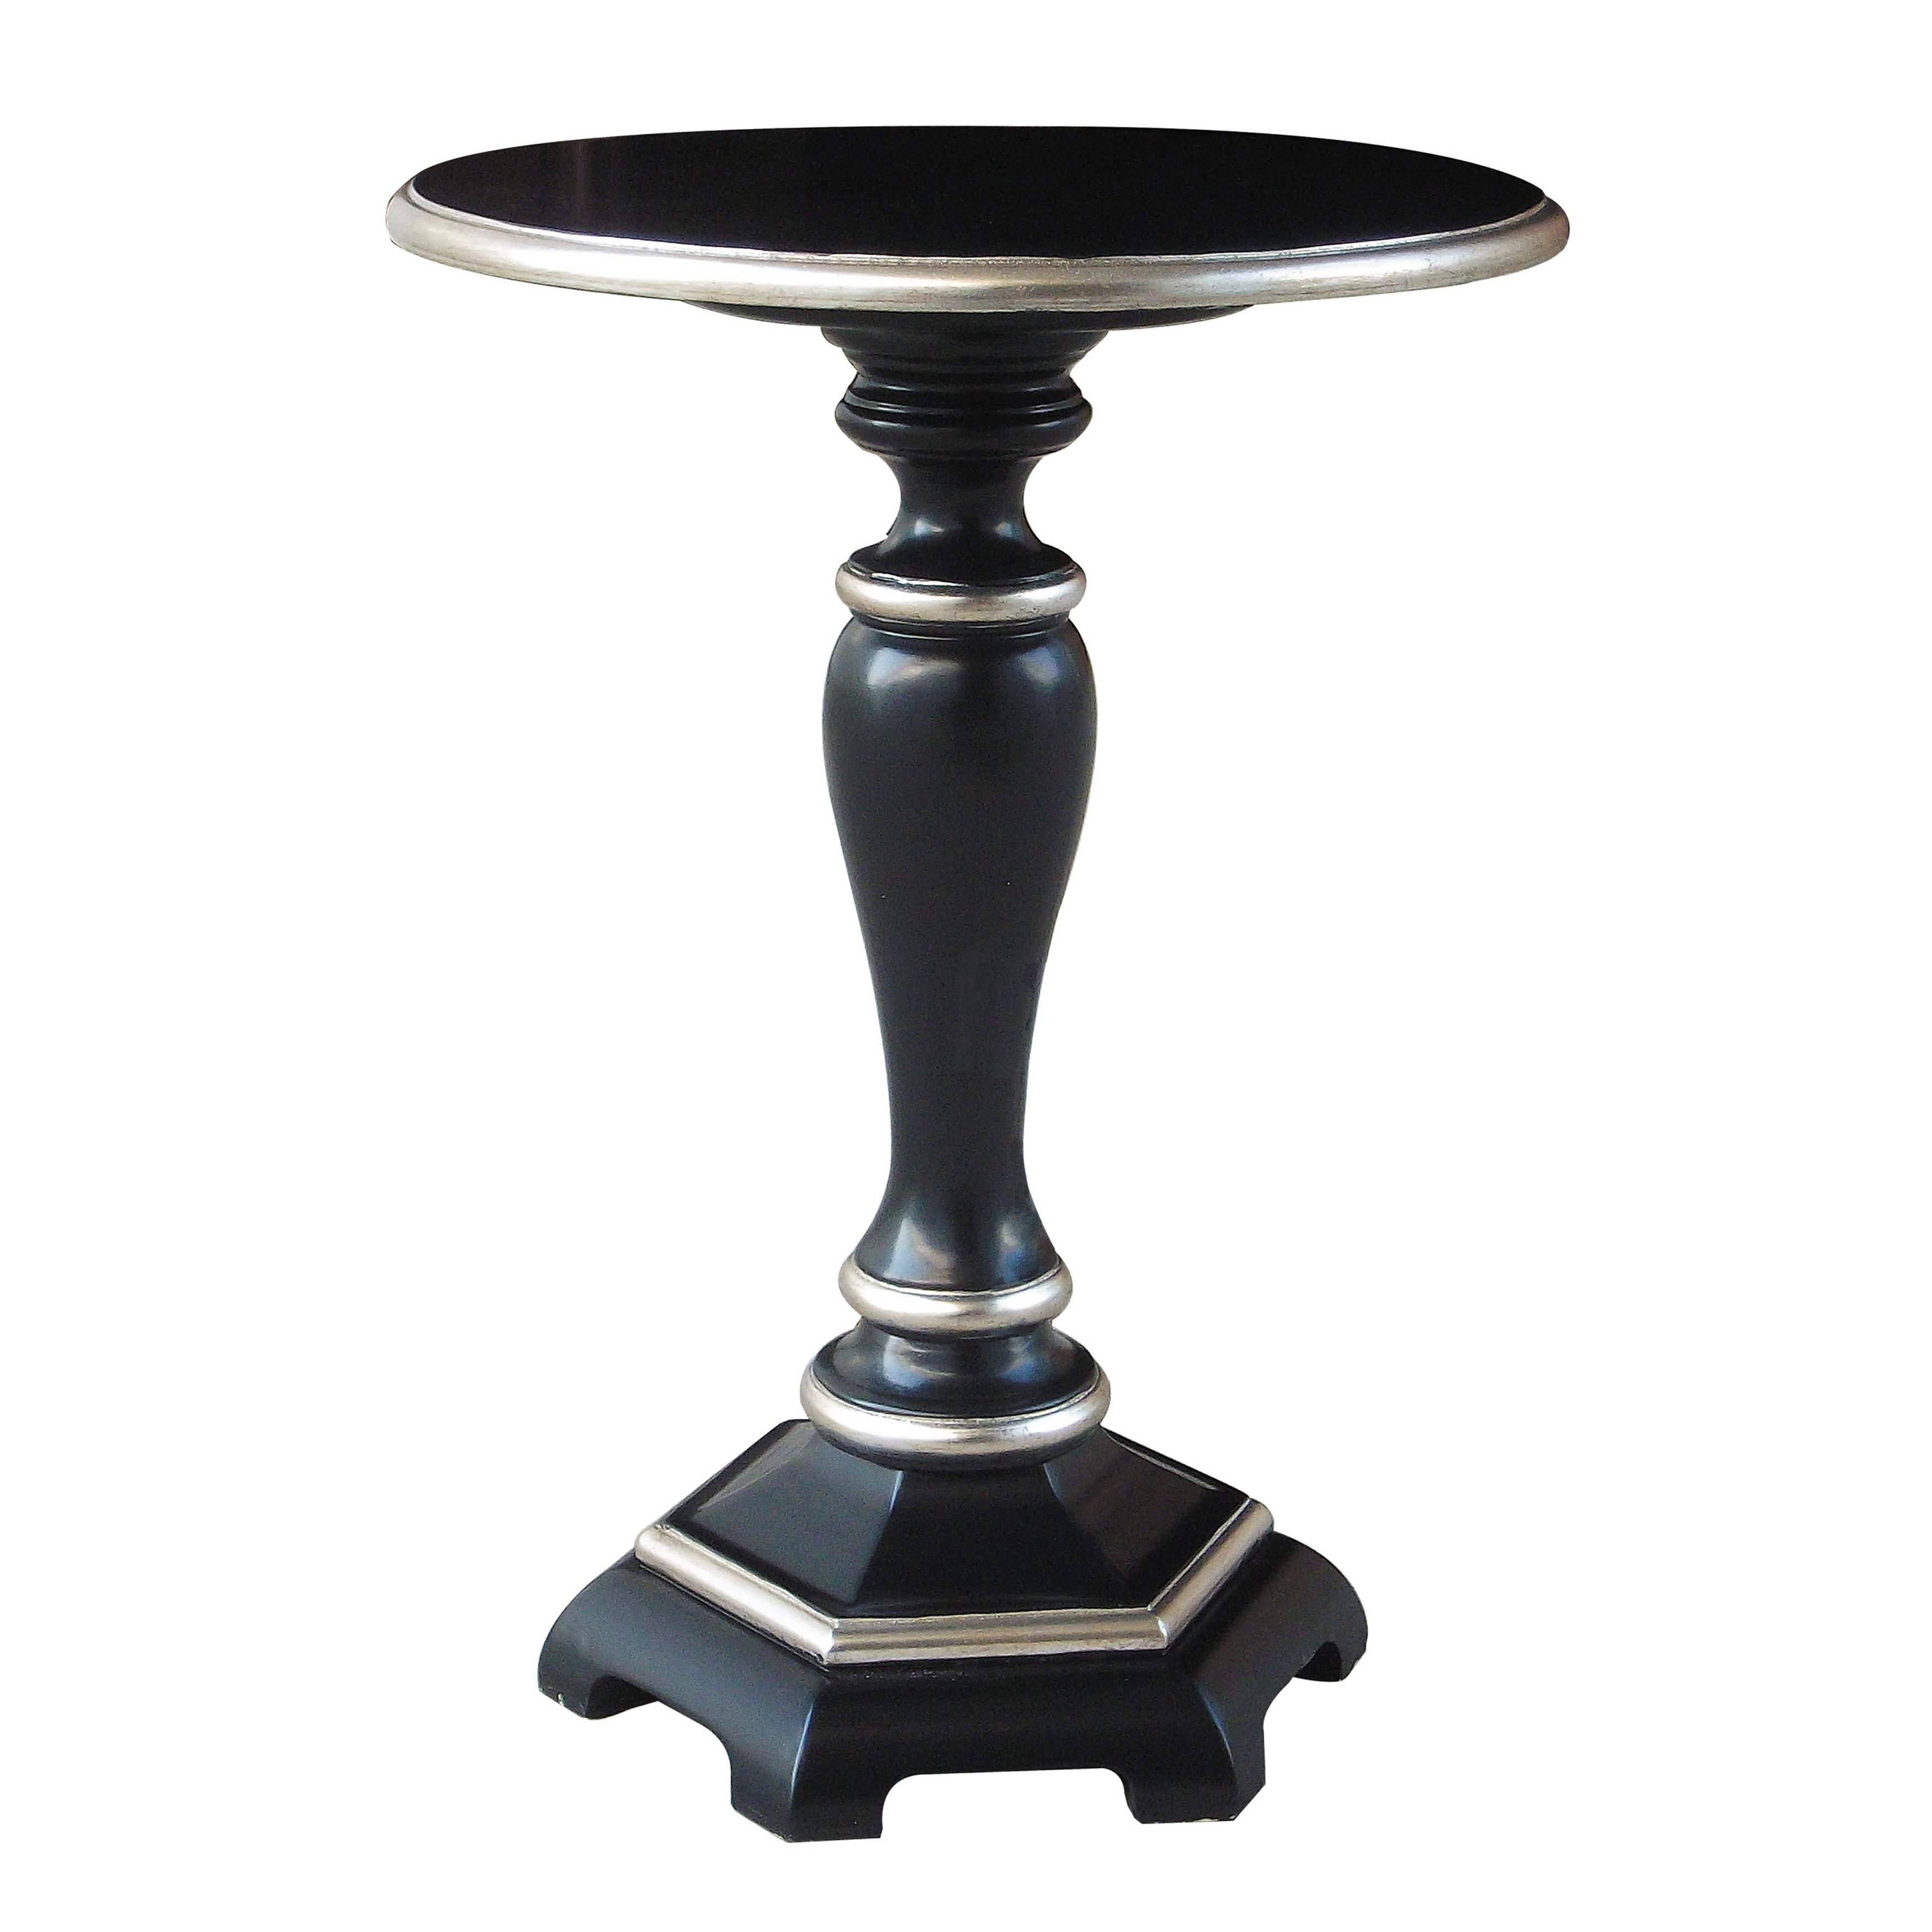 hand painted distressed black and silver finish round accent table multi free shipping today espresso grey mirrored bedside blue vase steel coffee teal end cloth brown linen